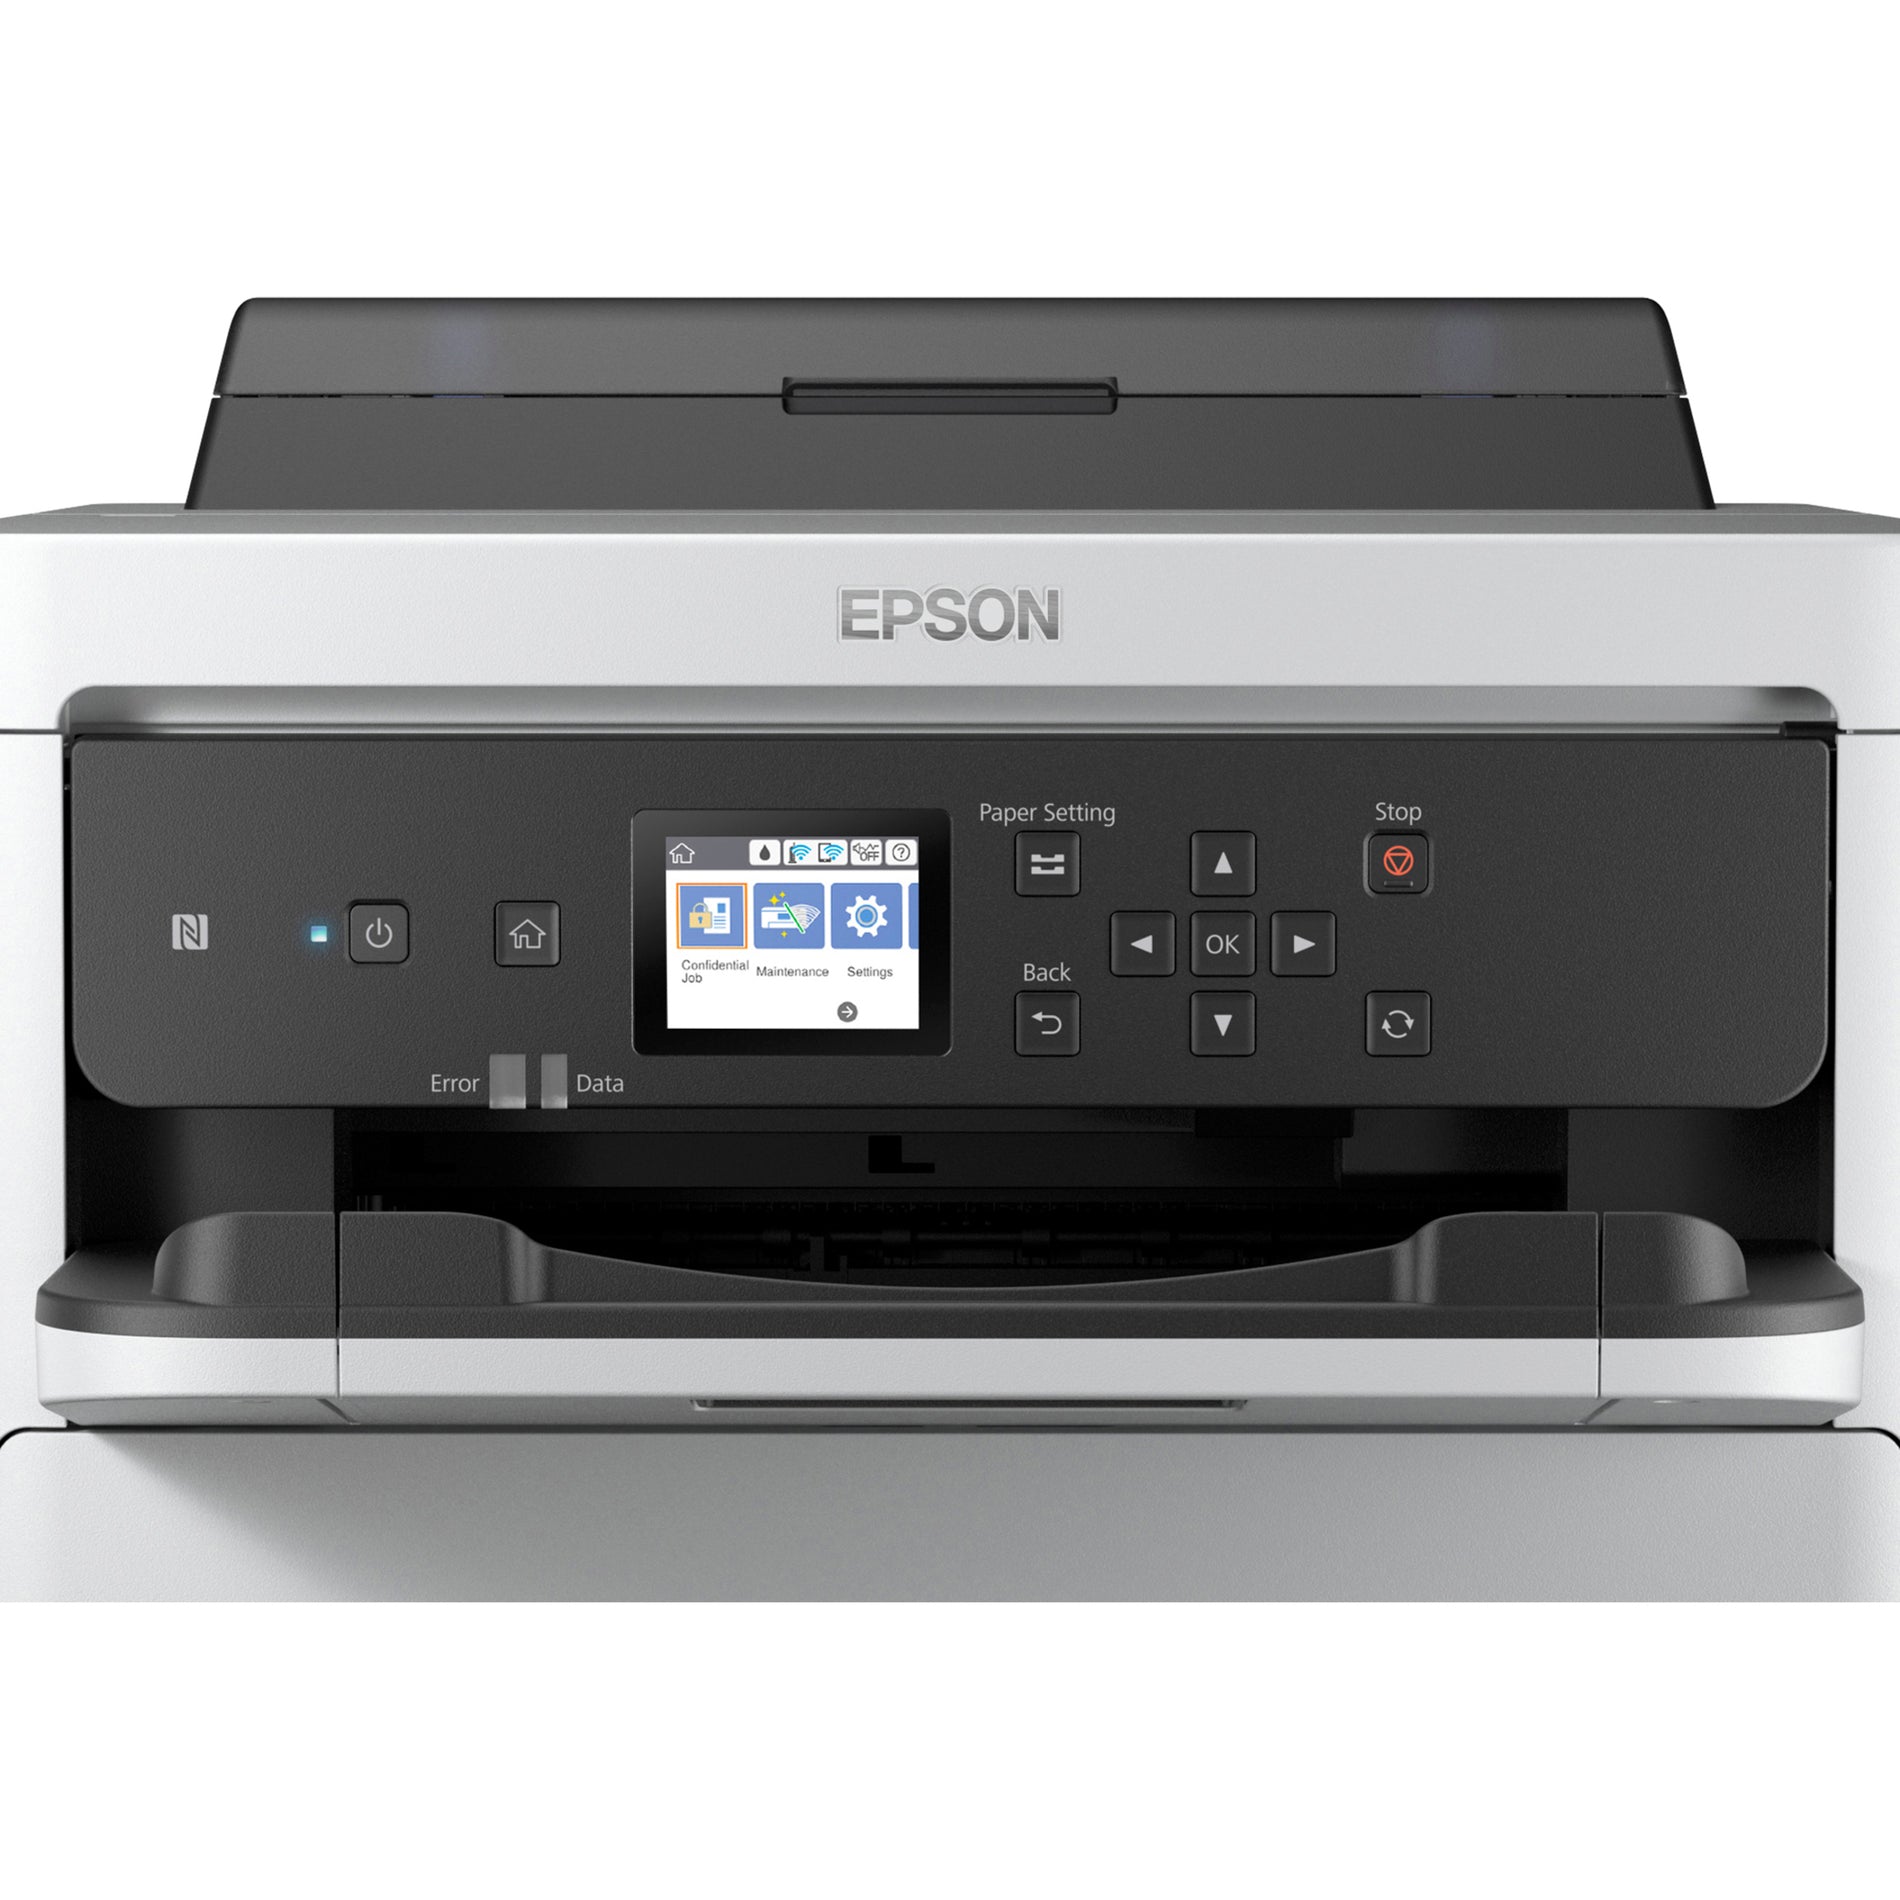 Epson WorkForce Pro WF-C5290 Network Color Printer with Replaceable Ink Pack System [Discontinued]